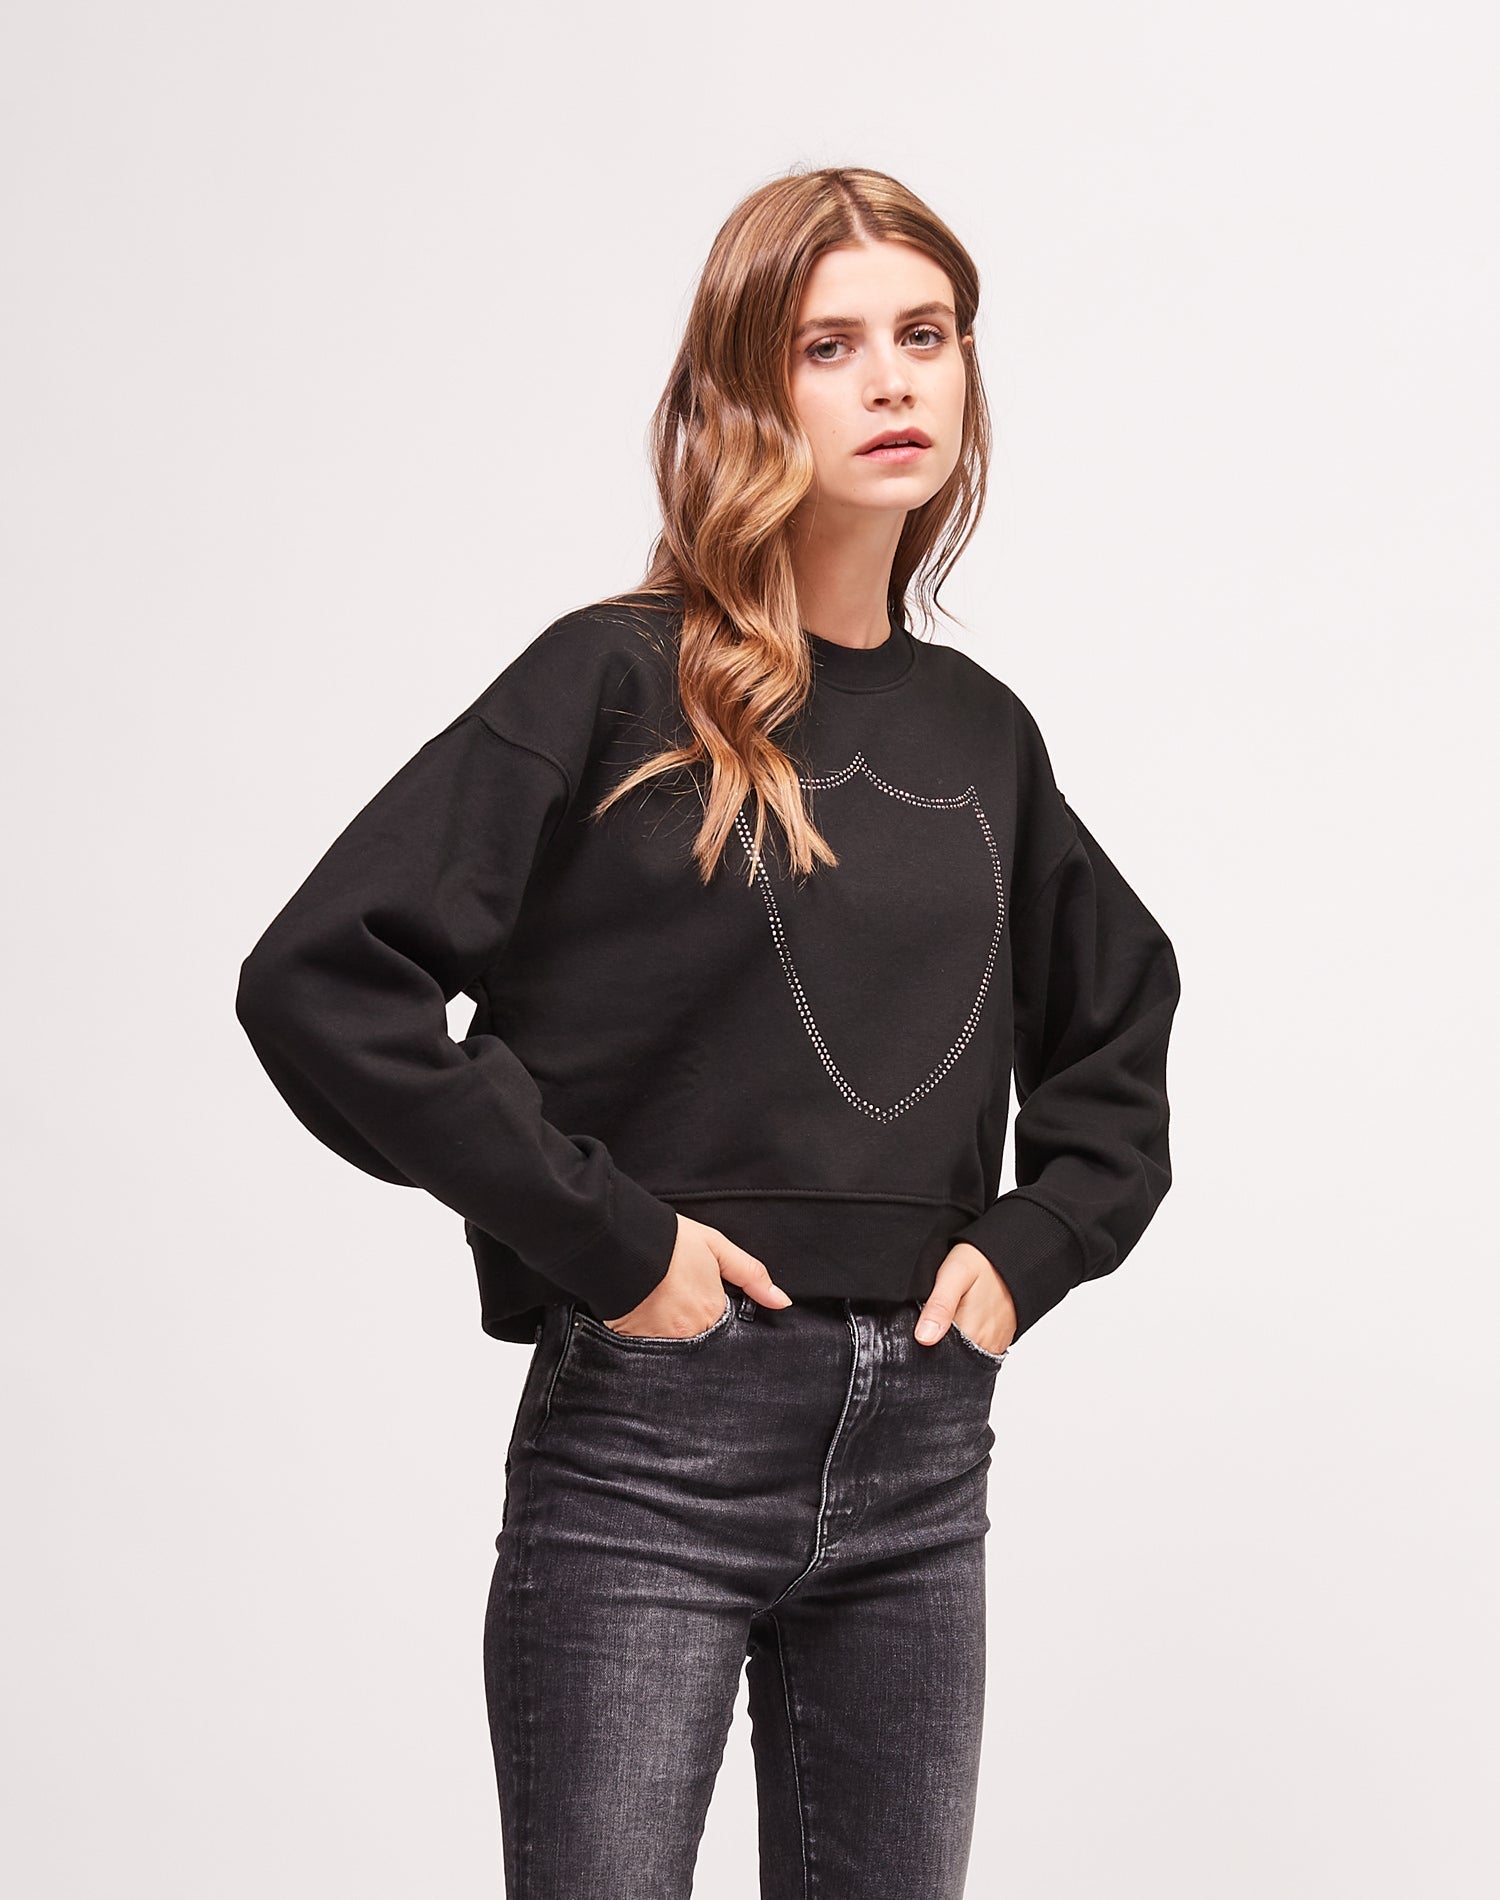 SHINY CROPPED SWEATER Crew neck cropped sweater with frontal shiny logo. Elastic ribbed wrist bands and waist band. 100% cotton. Made in Italy. HTC LOS ANGELES